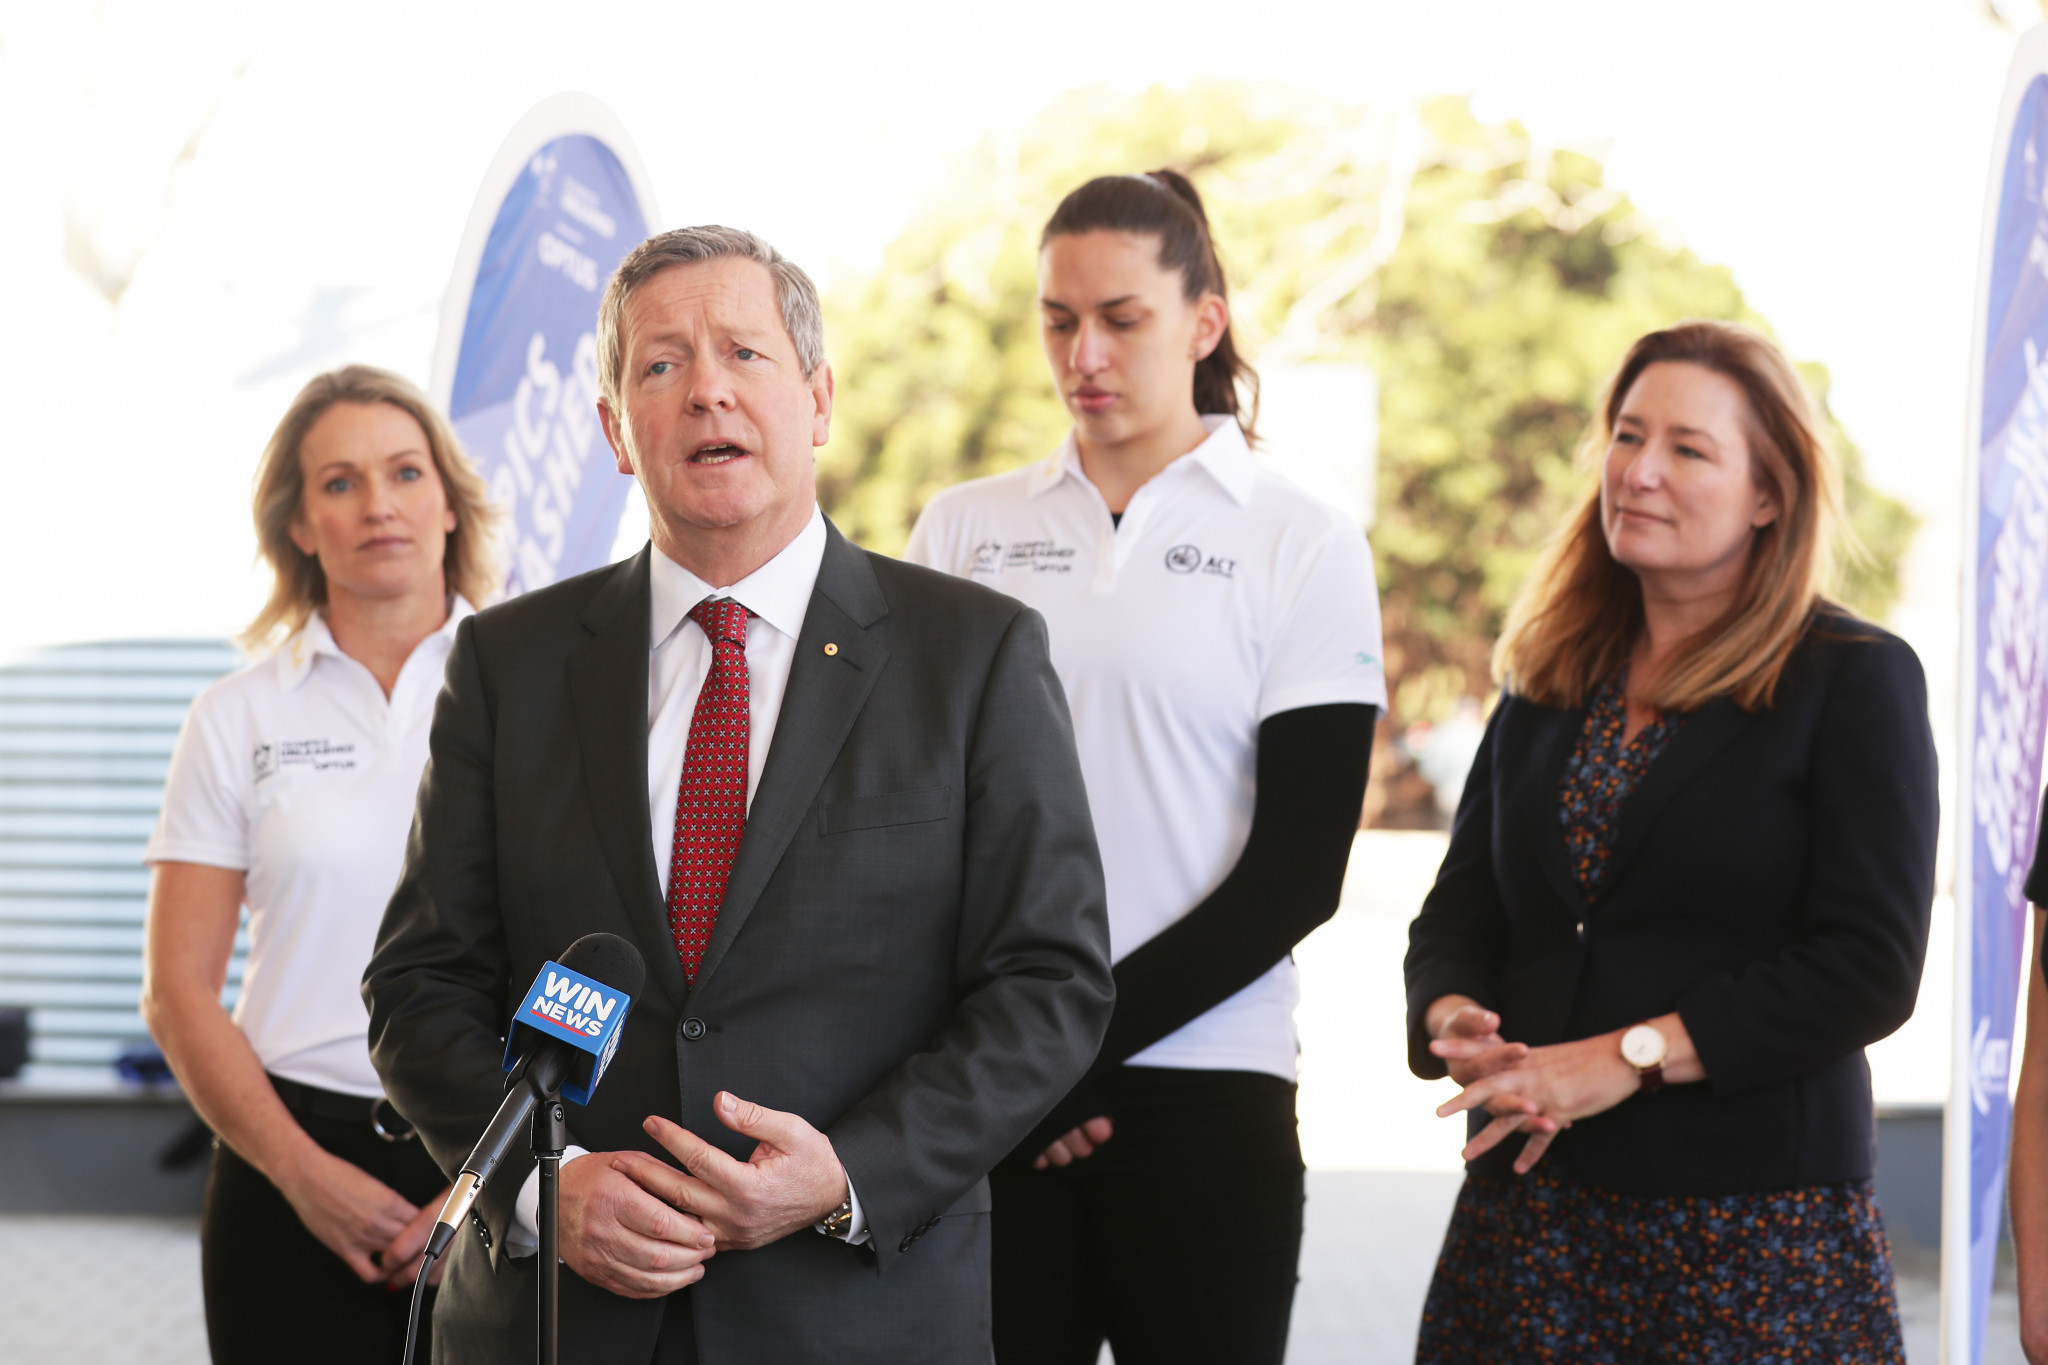 Olympics Unleashed project extended in Canberra 